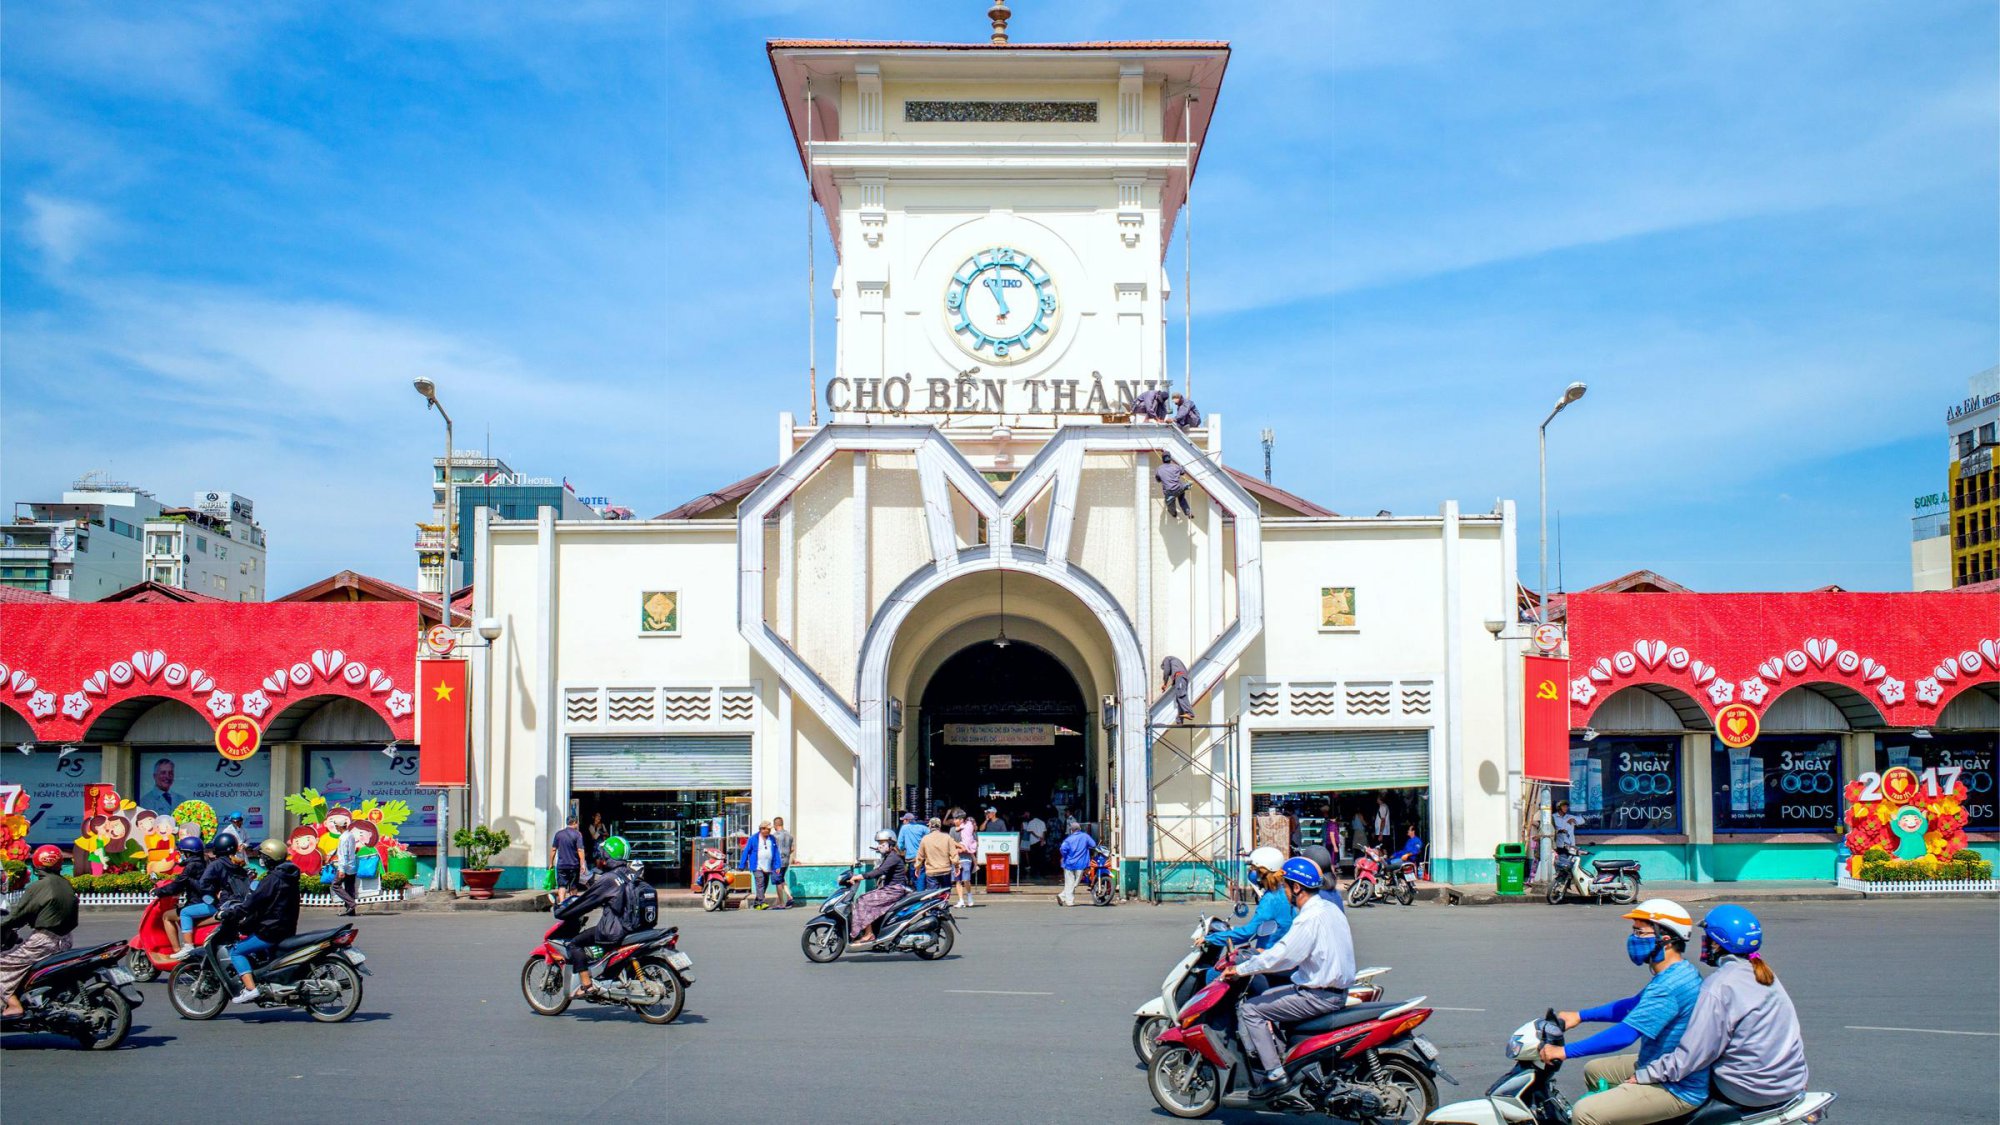 Travel Guide to Ben Thanh Market in Ho Chi Minh